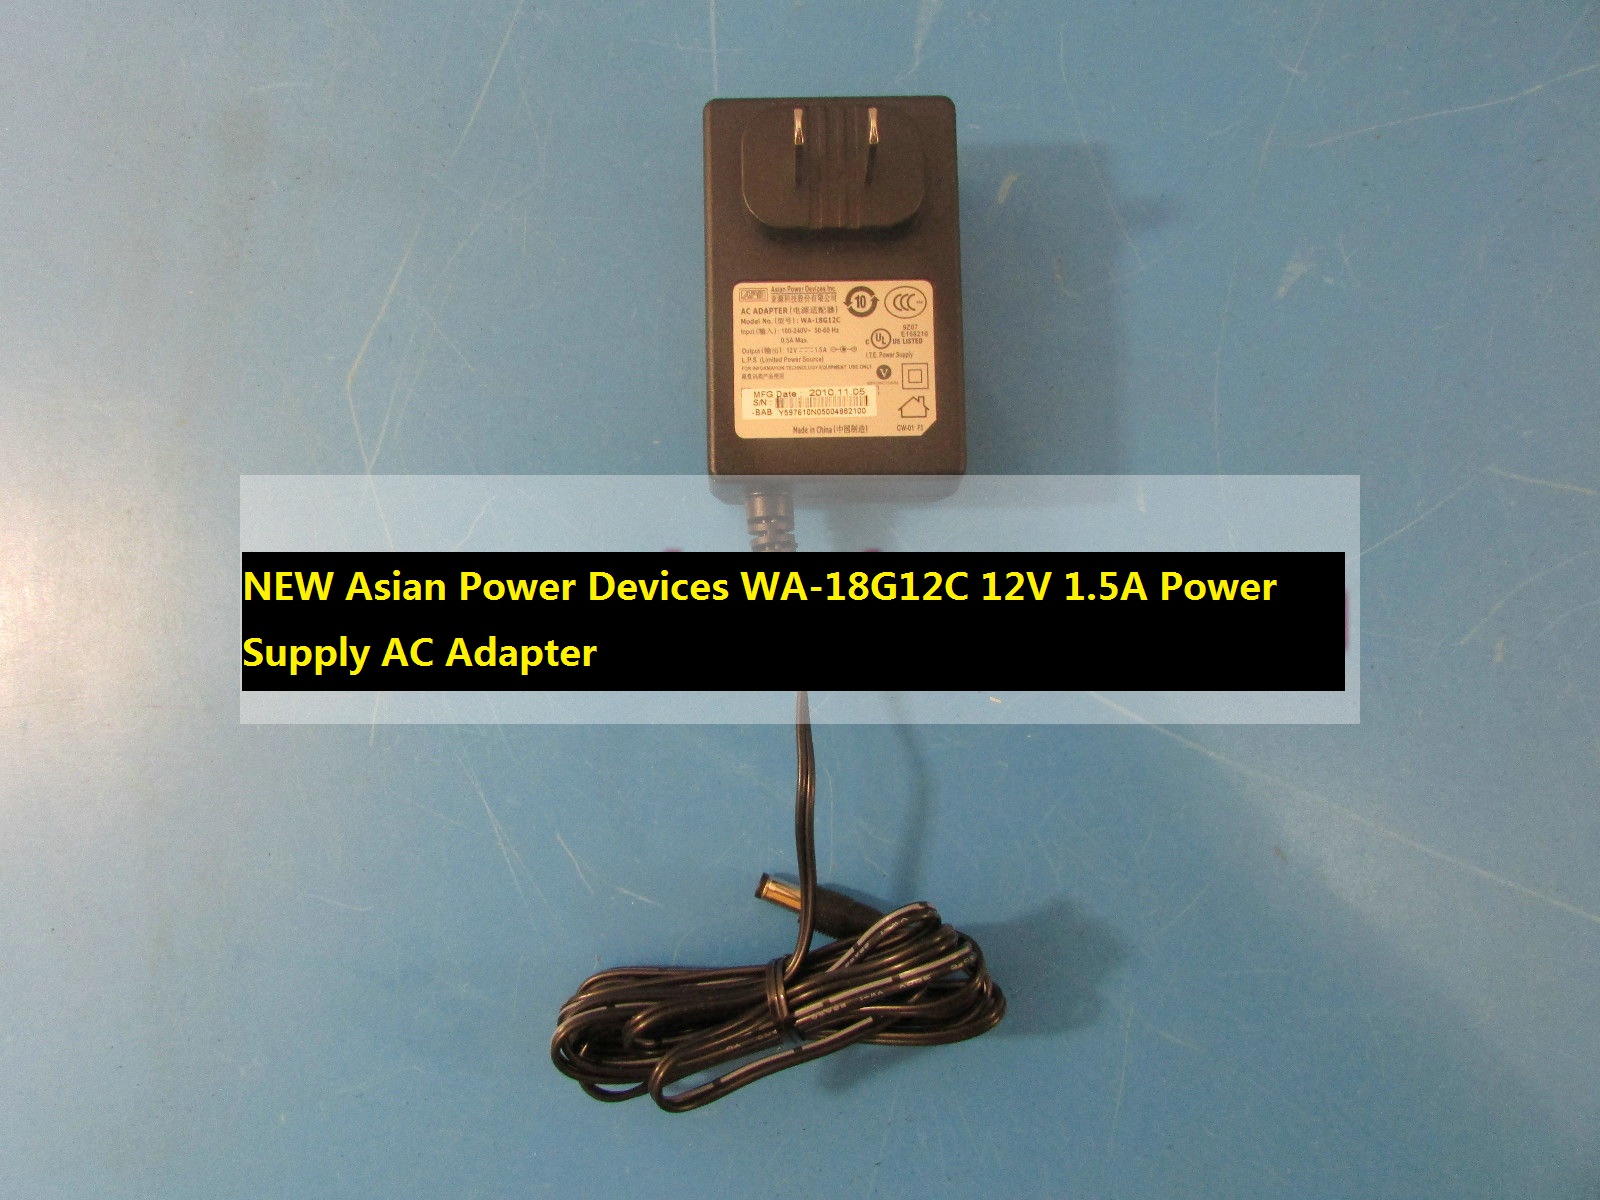 *Brand NEW*Asian 12V 1.5A AC Adapter Power Devices WA-18G12C Power Supply - Click Image to Close